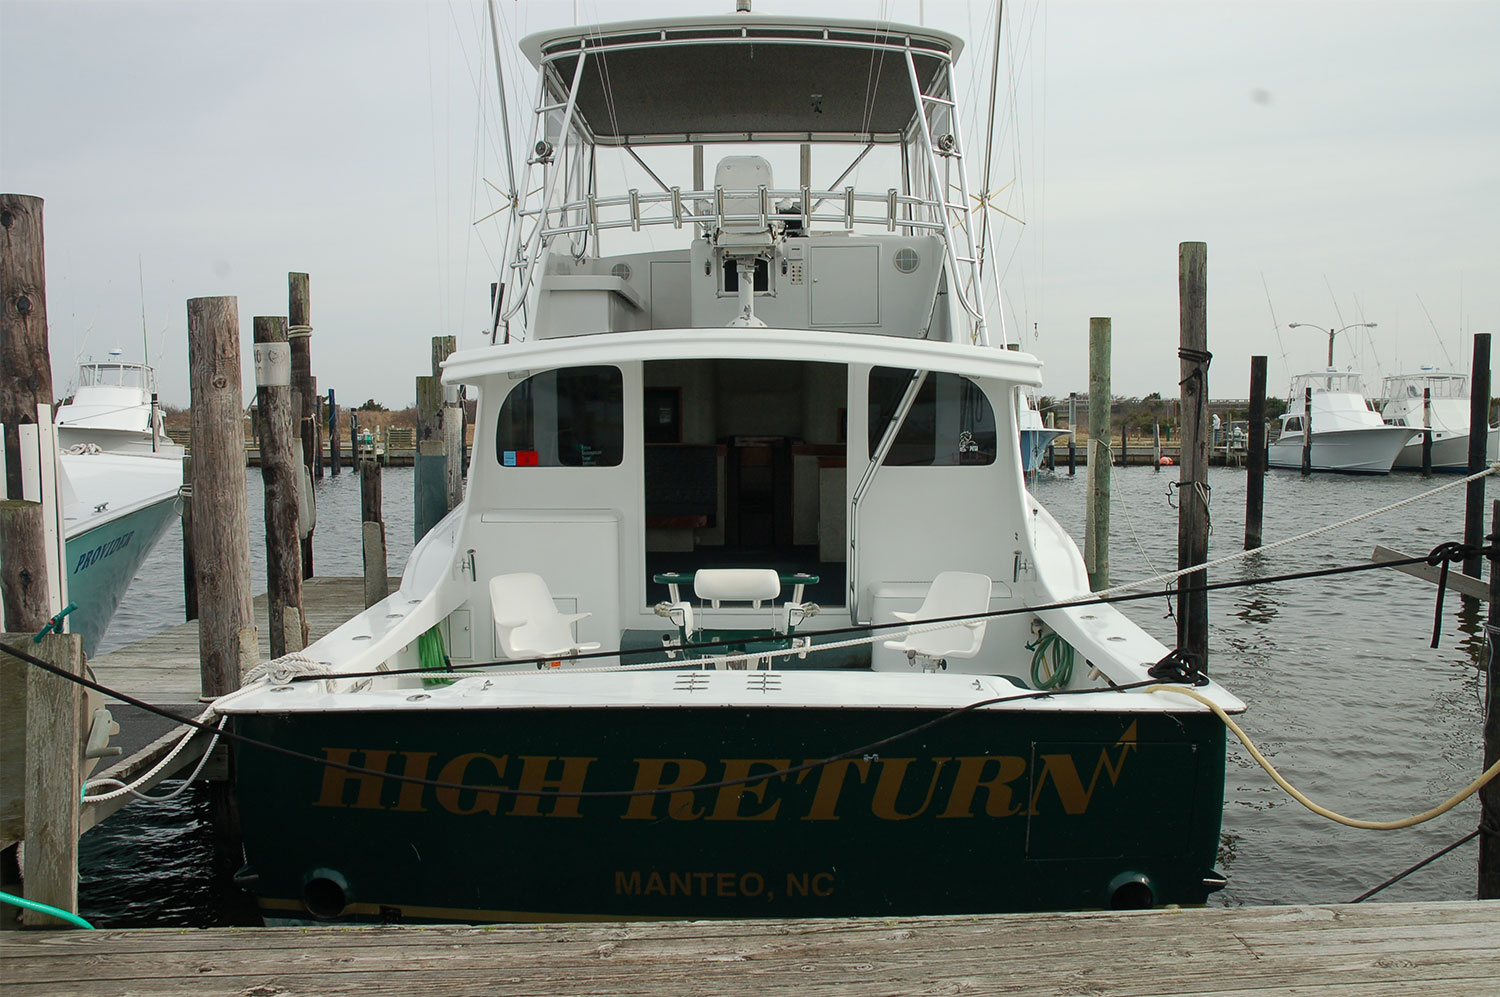 About the Day — High Return Sportfishing